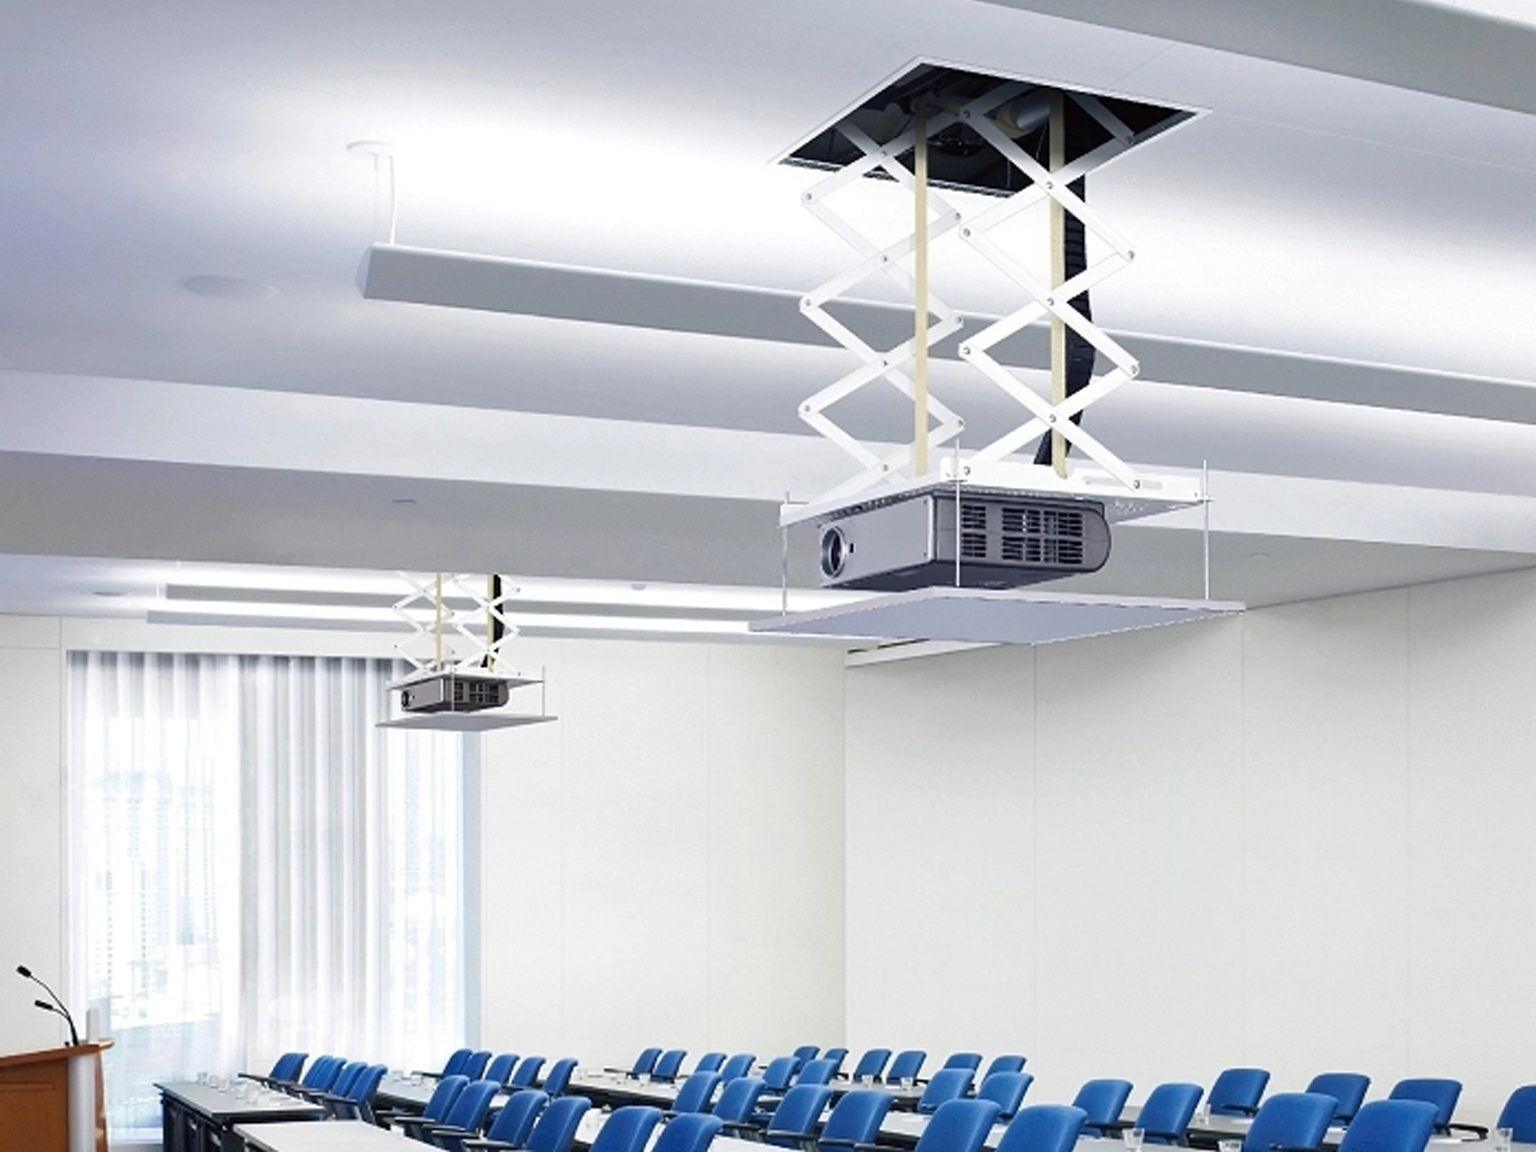 Projectors with electric fittings coming out of the ceiling, demonstrating a professional install by approved AV experts